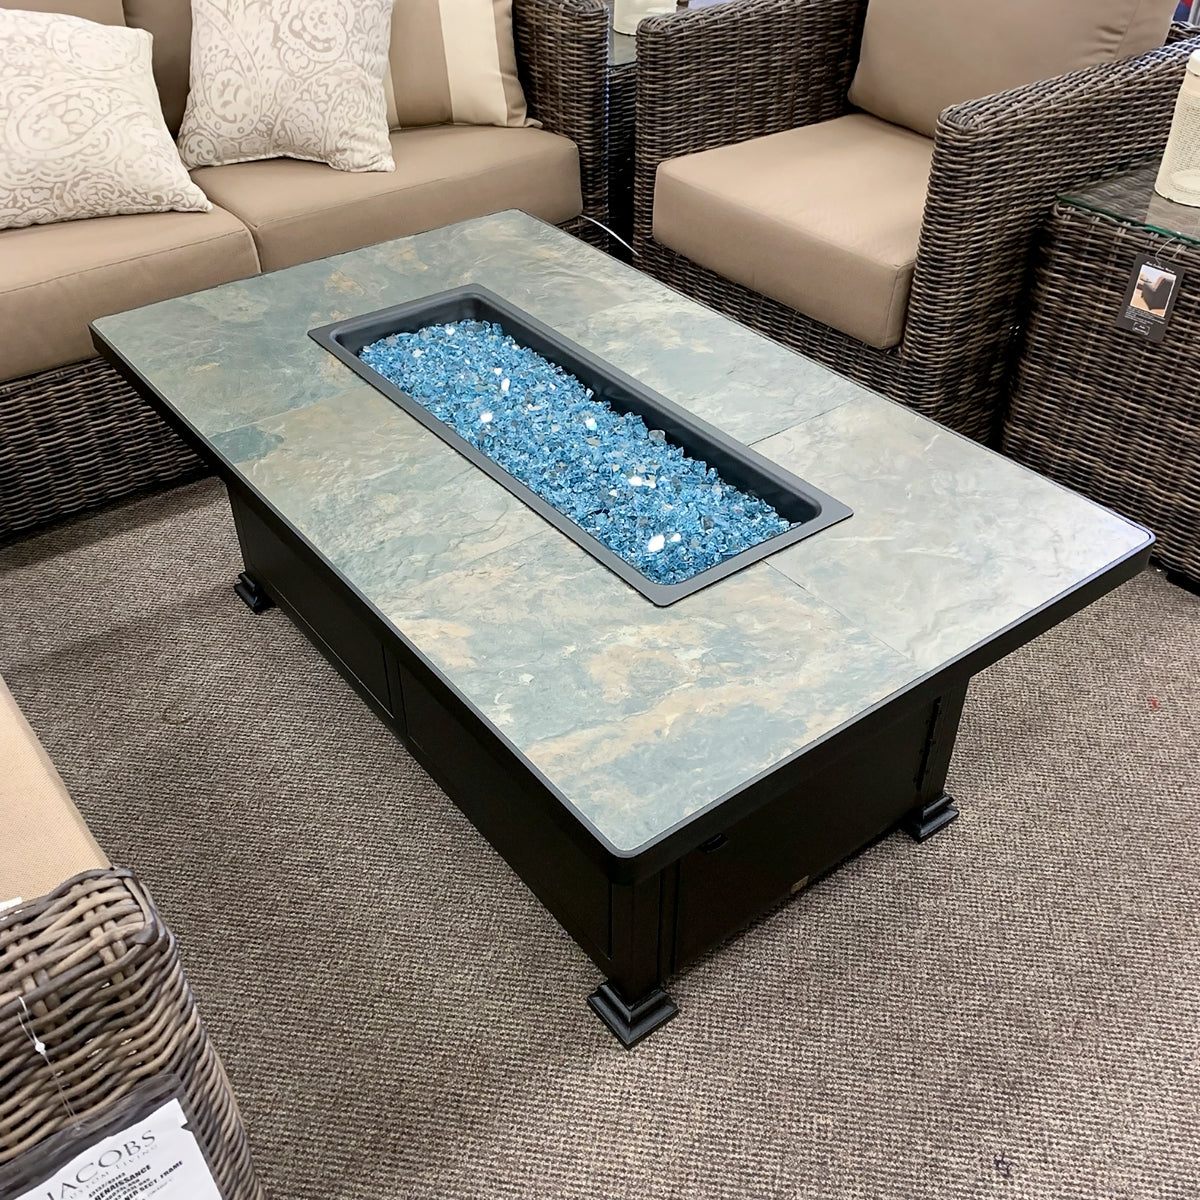 O.W. Lee Azul Slate Rectangle Fire Pit is available at Jacobs Custom Living our Jacobs Custom Living Spokane Valley showroom.